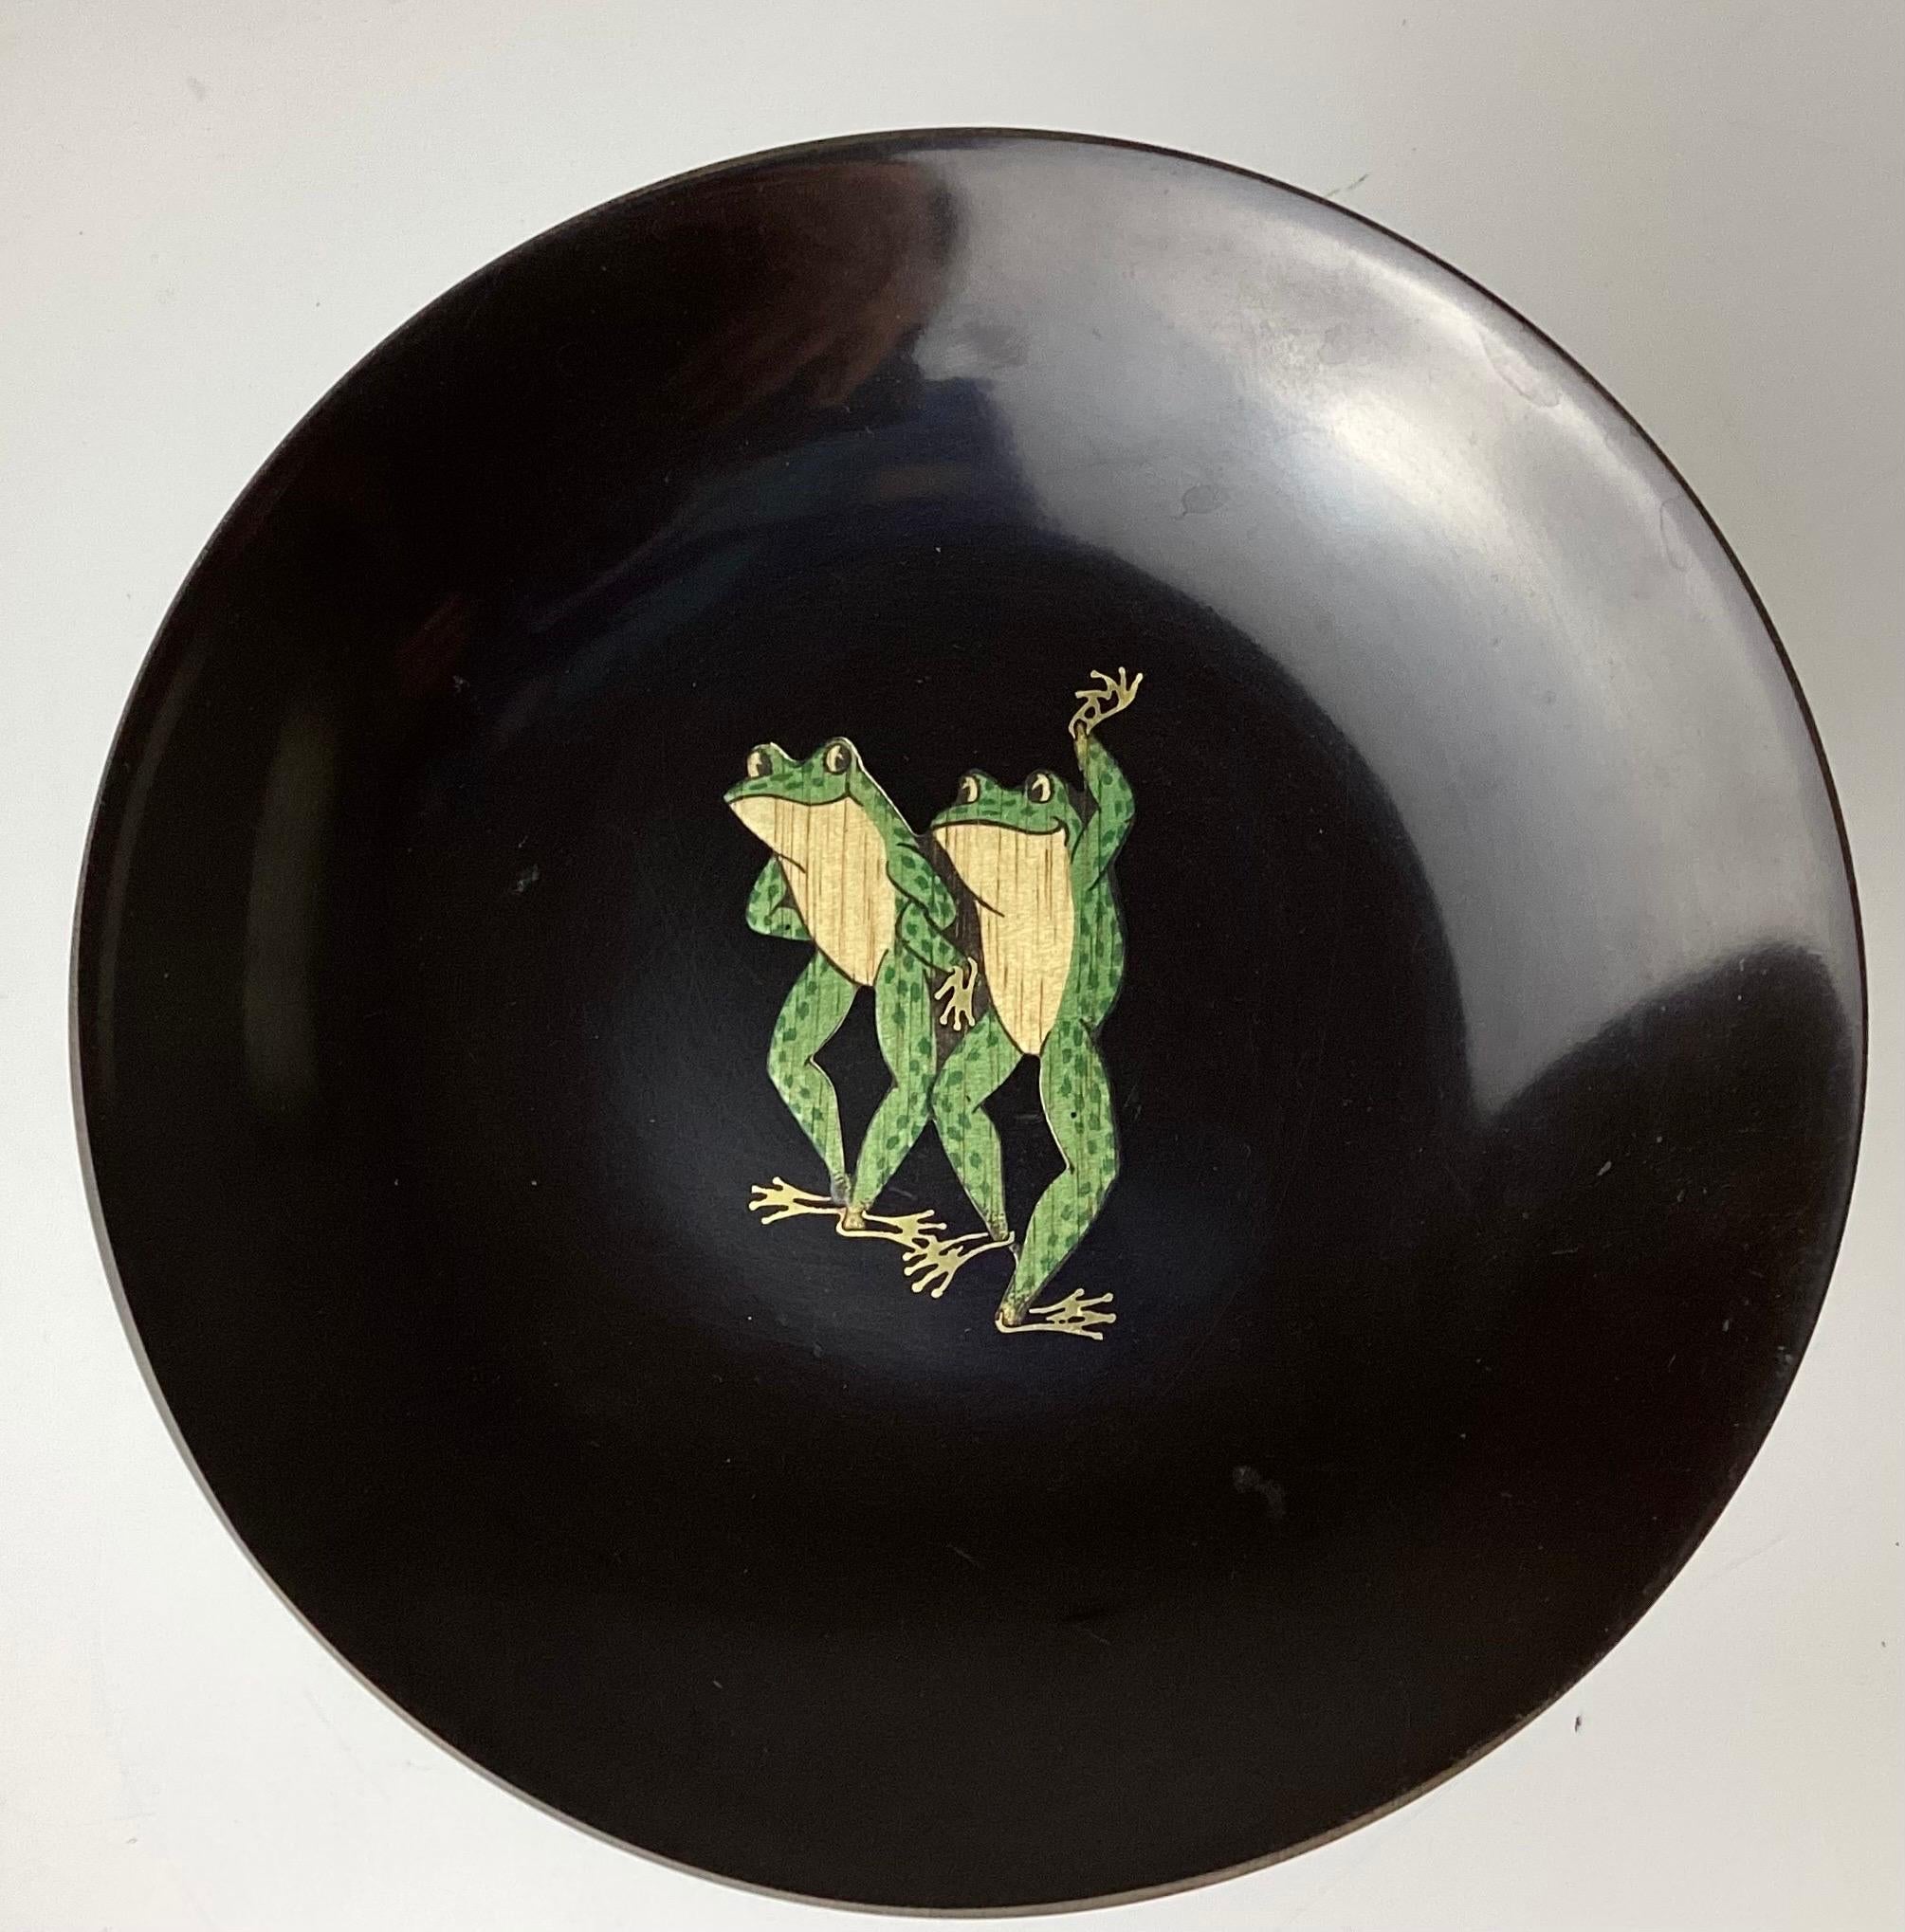 Couroc bowl with frogs. Resin, Monterey, California 1970s. Charming whimsical oval tray decorated with dancing frogs. Dimensions: 9 5/8 inches deep x 12 1/2 inches wide x 3/4 inches high Guthrie Courvoisier and his wife, Moira Wallace, established